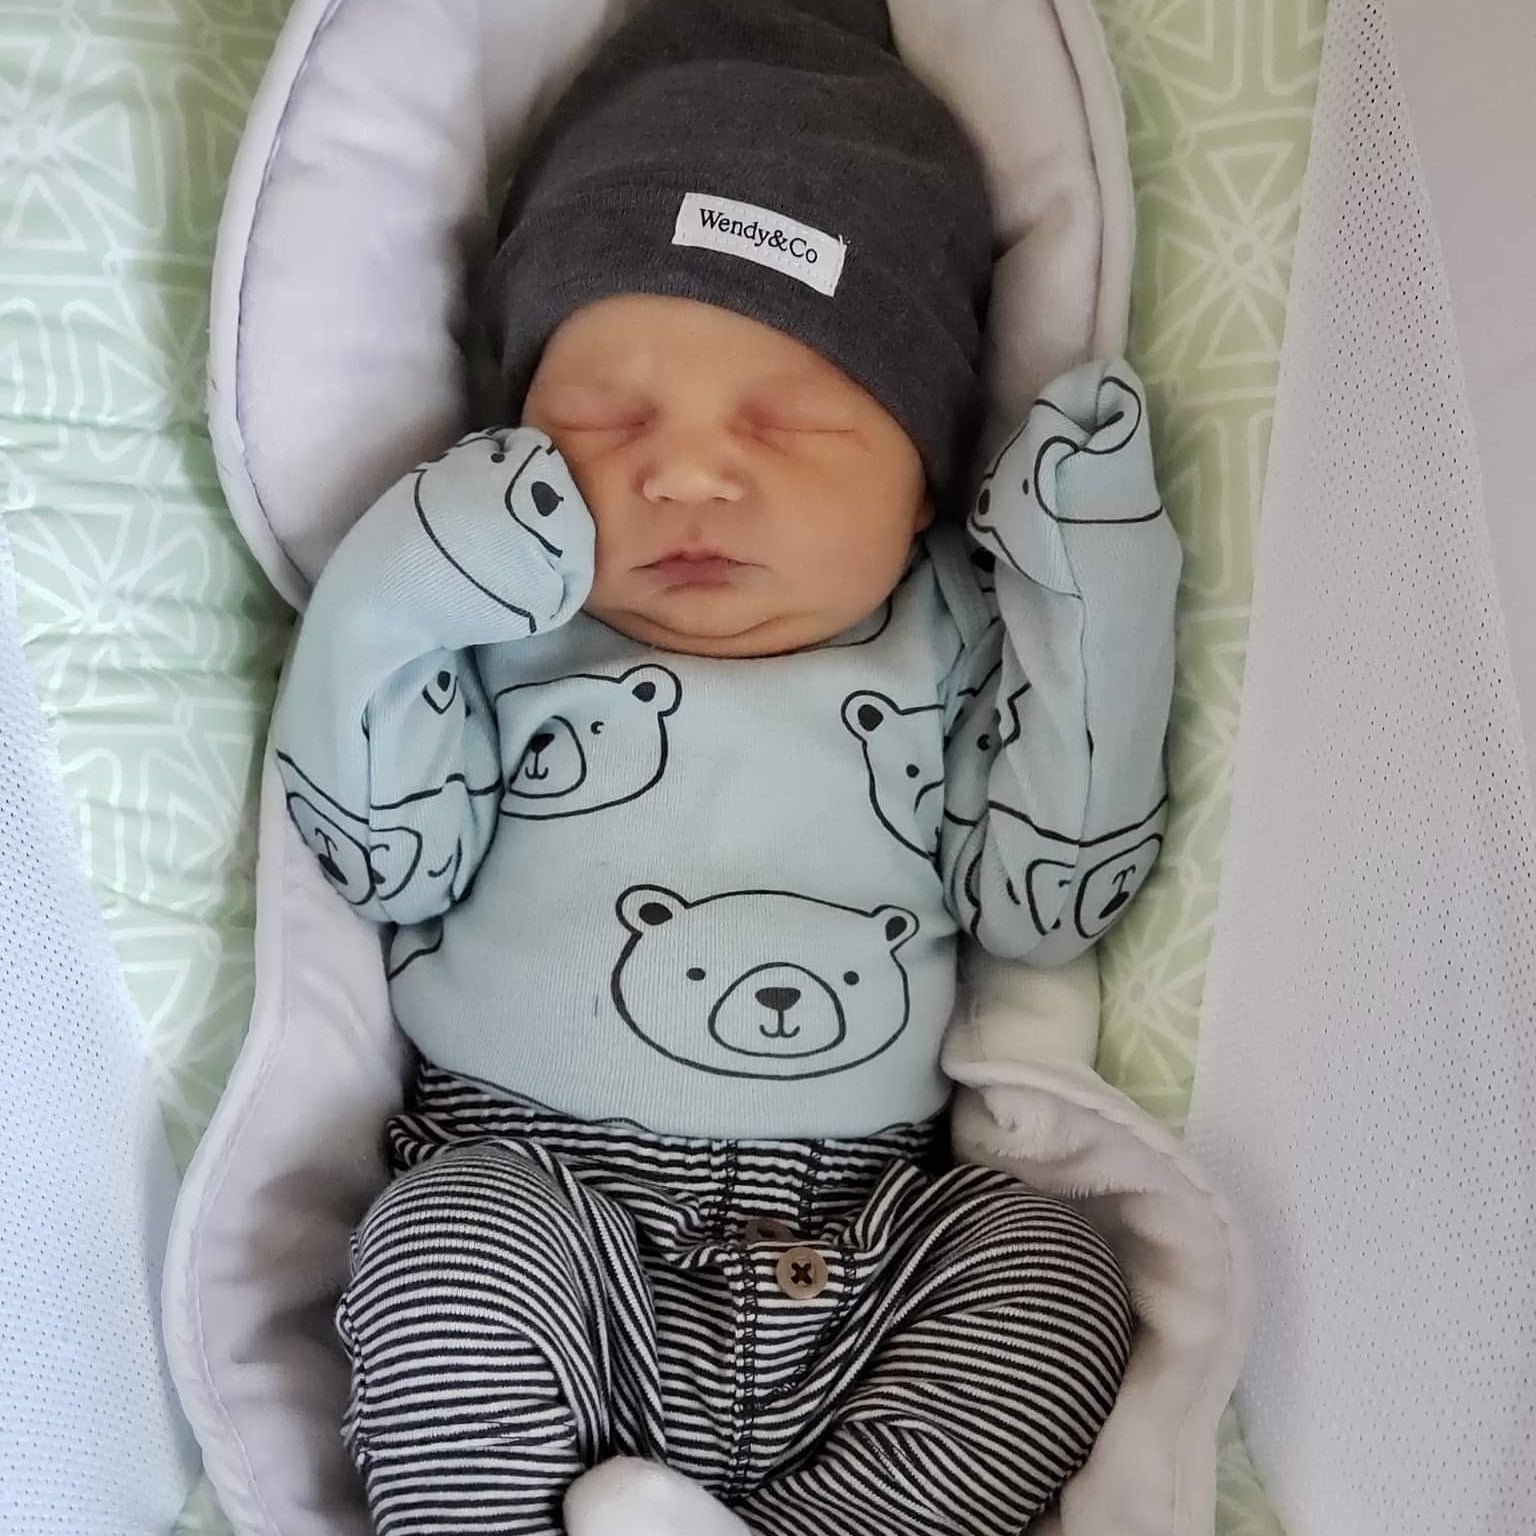 Newborn baby sleeping with woodland outfit and beanie with top knot.